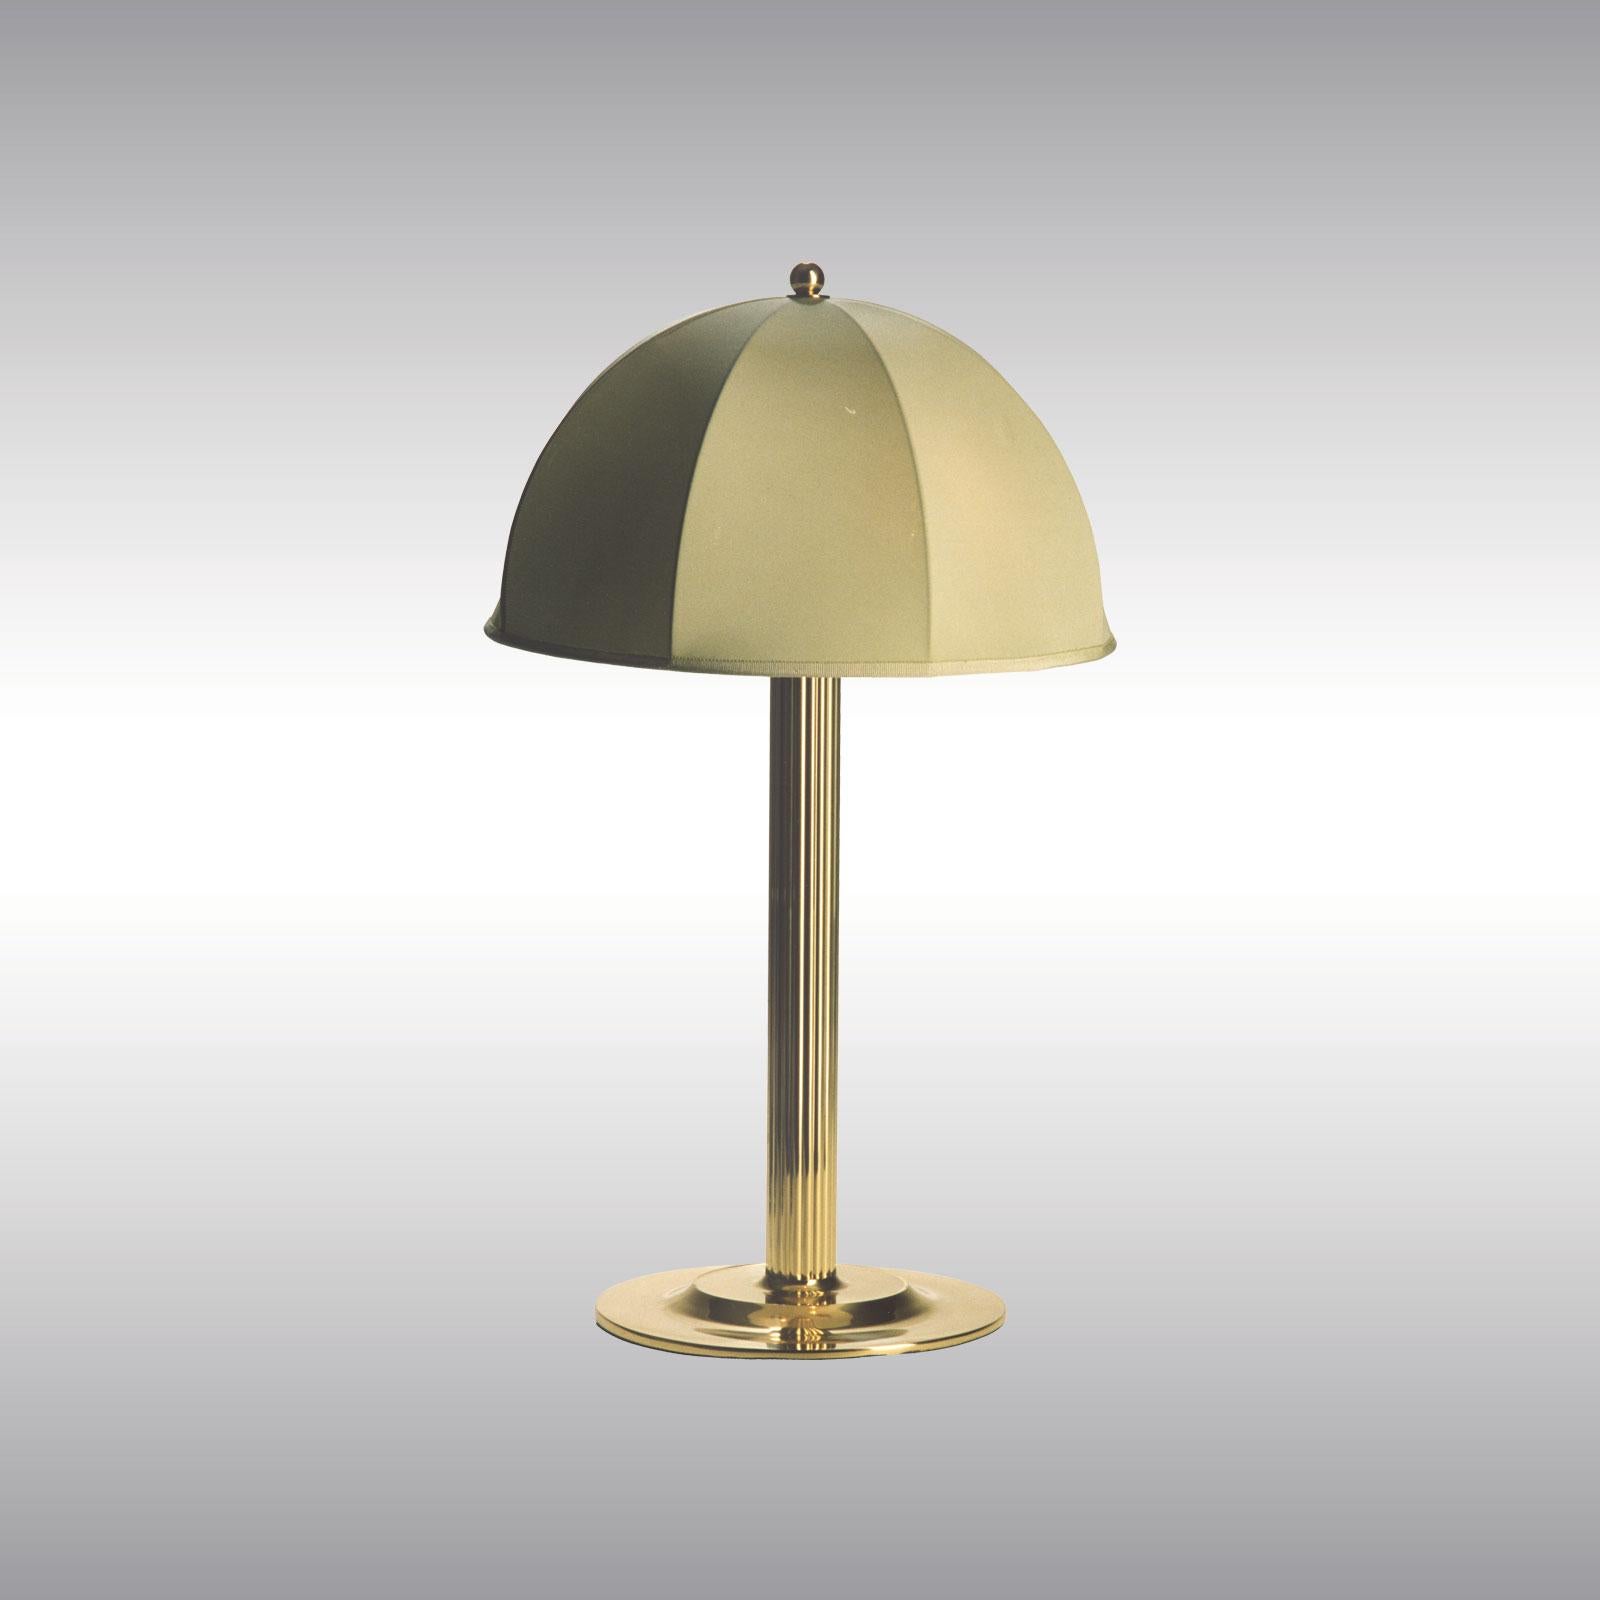 Similar to the Steiner lamp by Adolf Loos but with a silk shade. Published in Deutsche Kunst und Dekoration in 1915, for the bedroom of the Primavesi Family.

Most components according to the UL regulations, with an additional charge we will UL-list